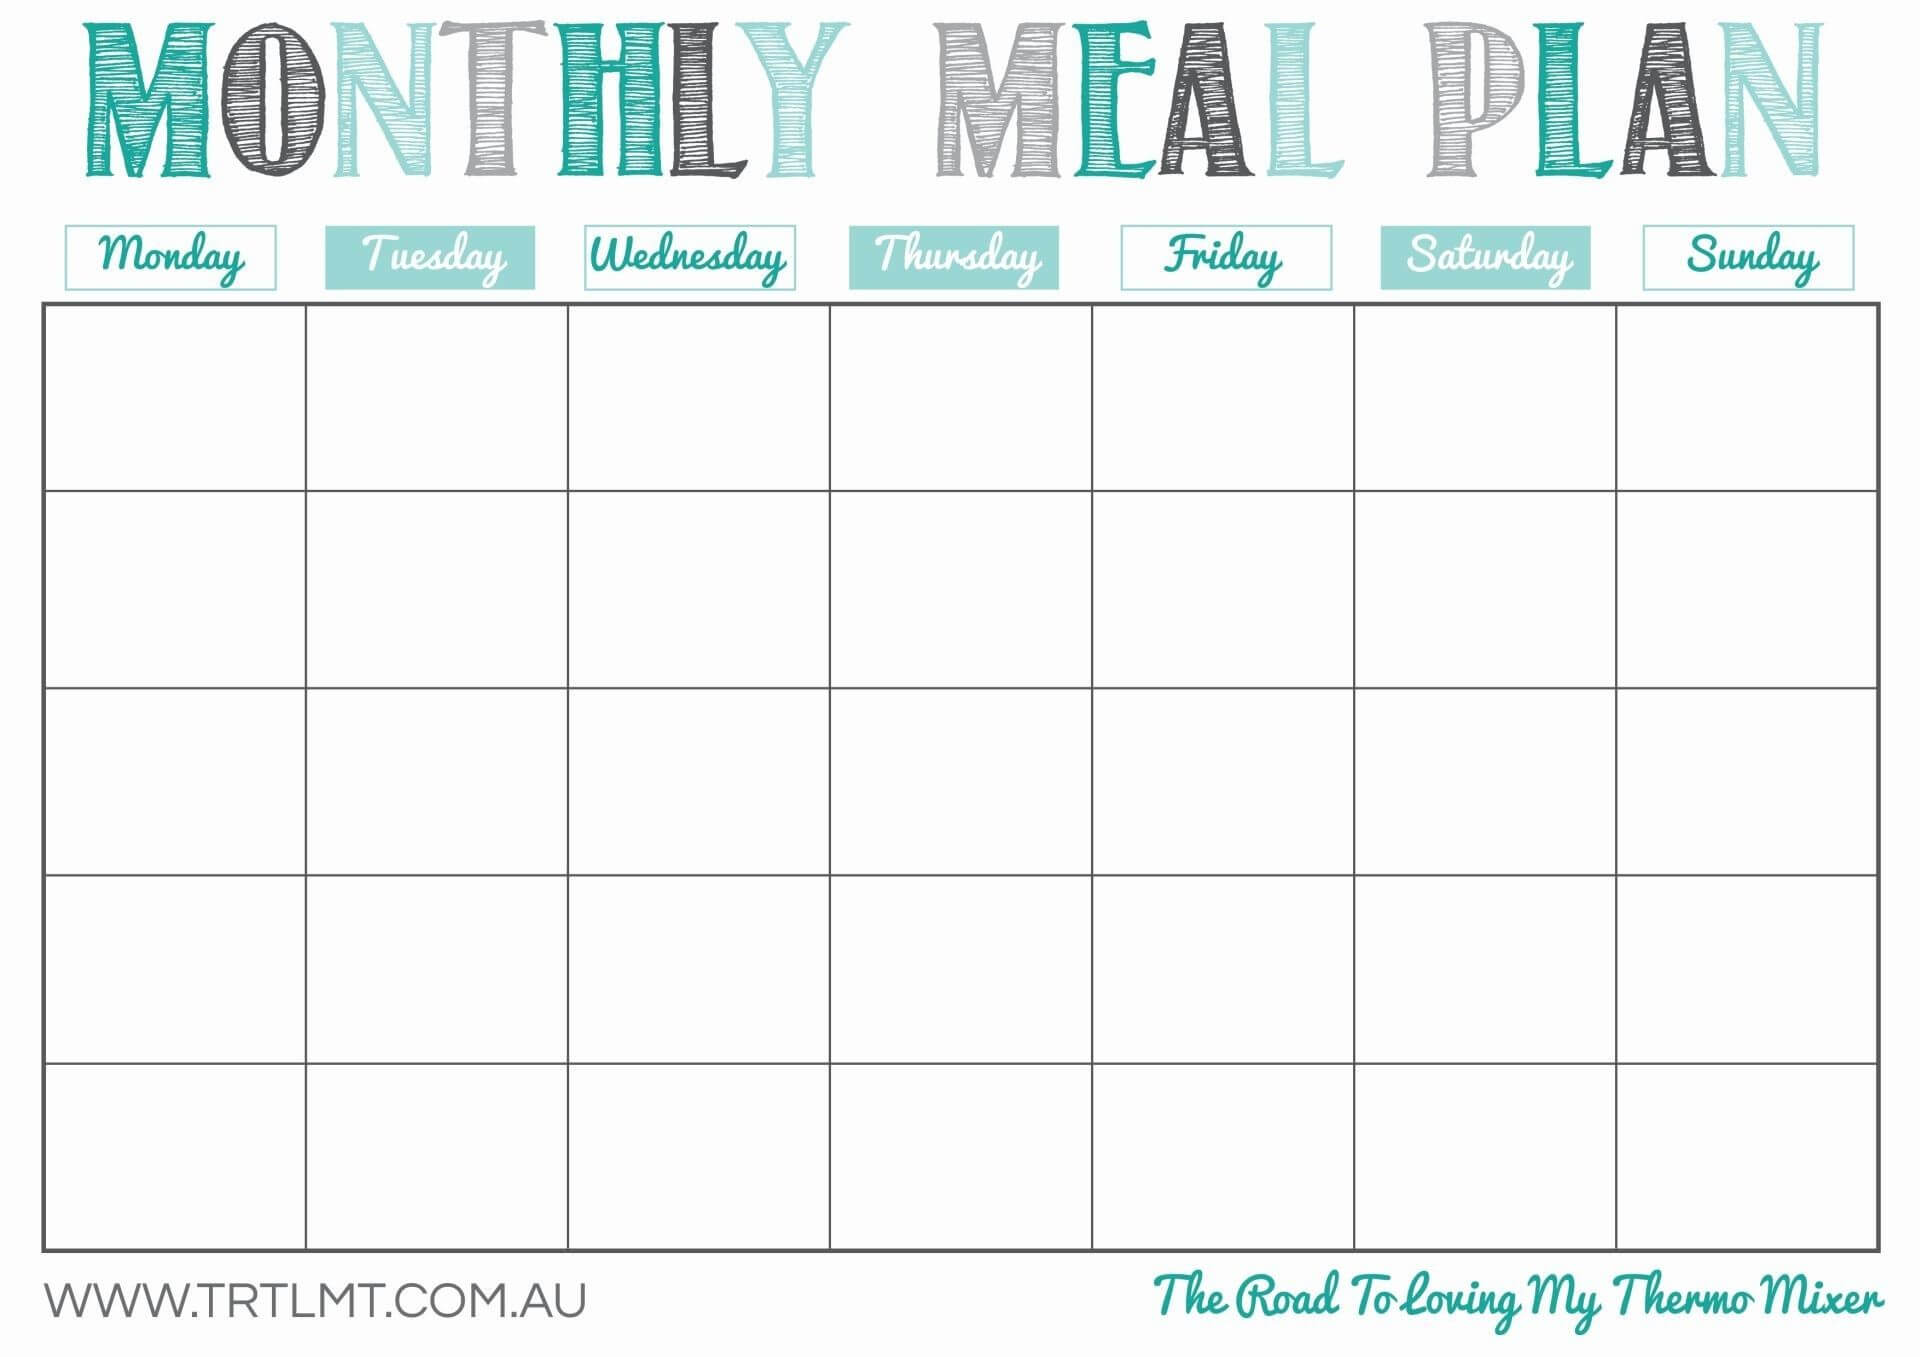 Monthly Meal Plan Template Printable. Undated So You Can Use Intended For Blank Meal Plan Template